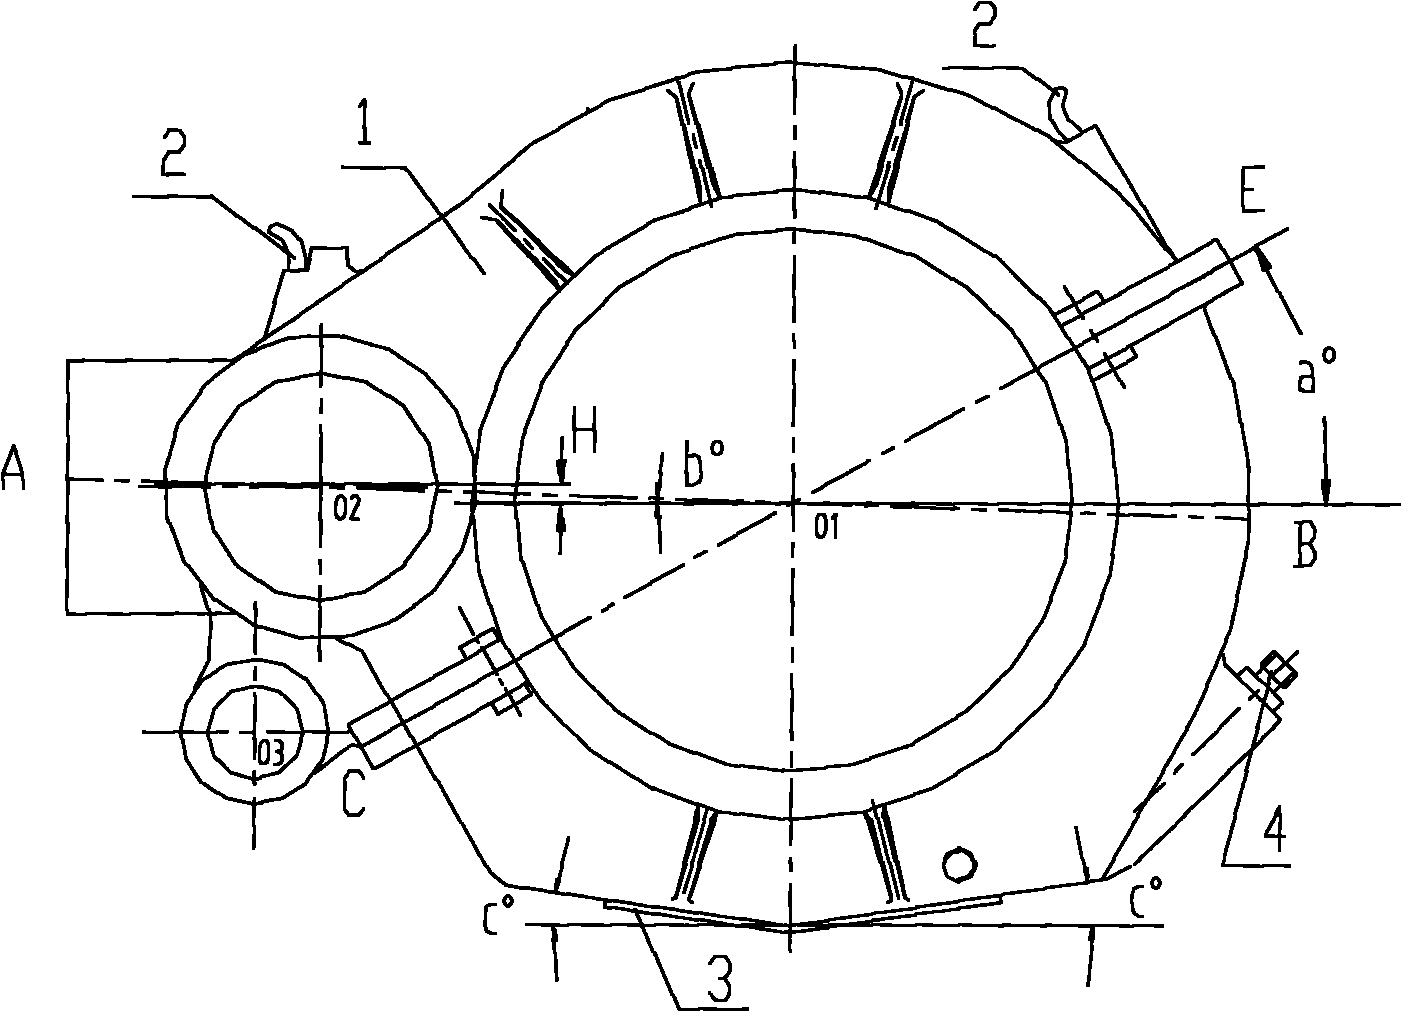 Processing method of gear reducer